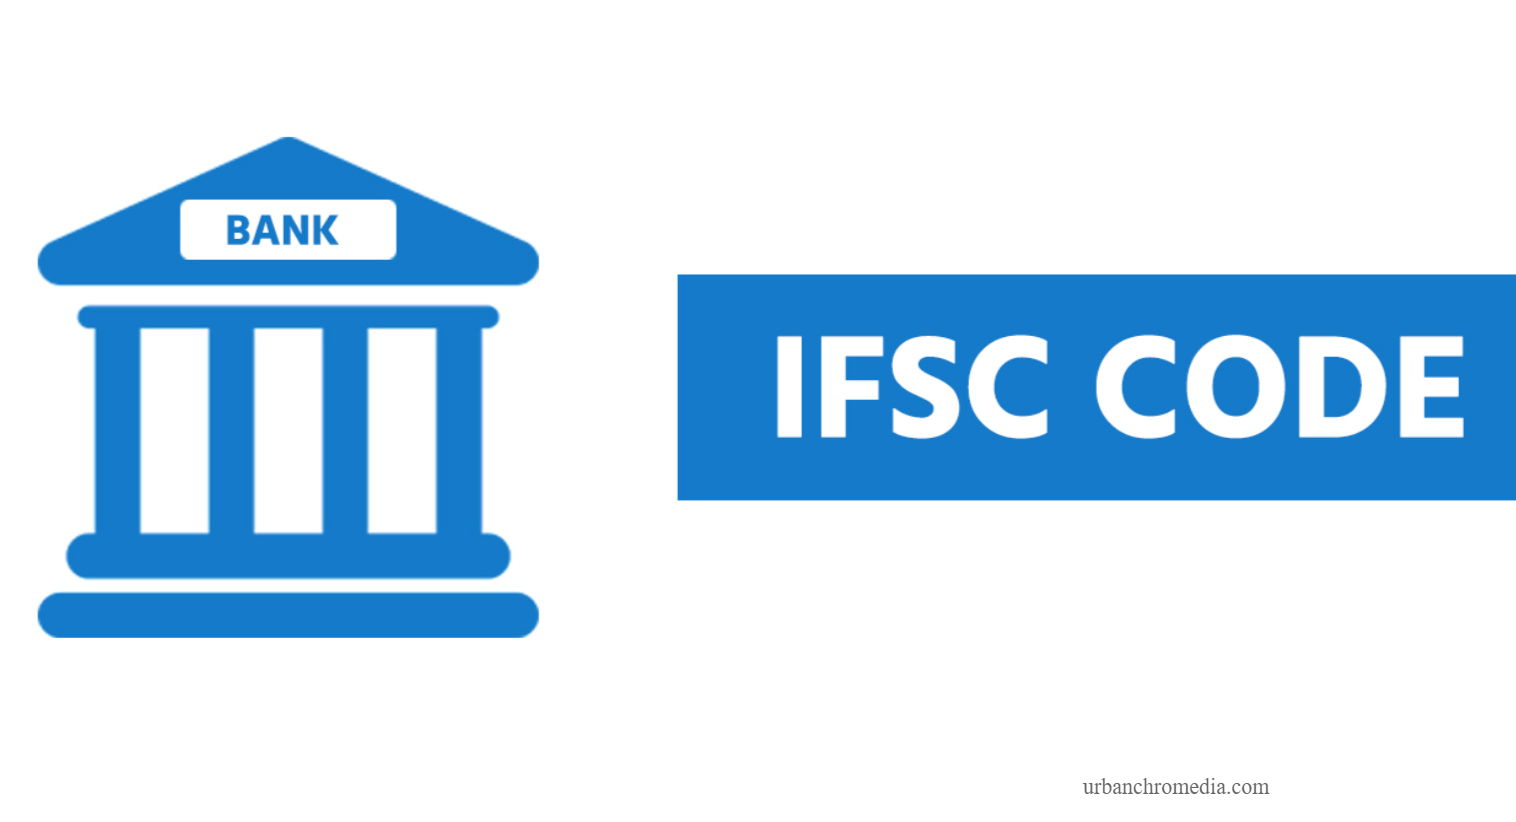 IFSC Code Explained: IFSC Full Form, Meaning, Uses and How to Find It